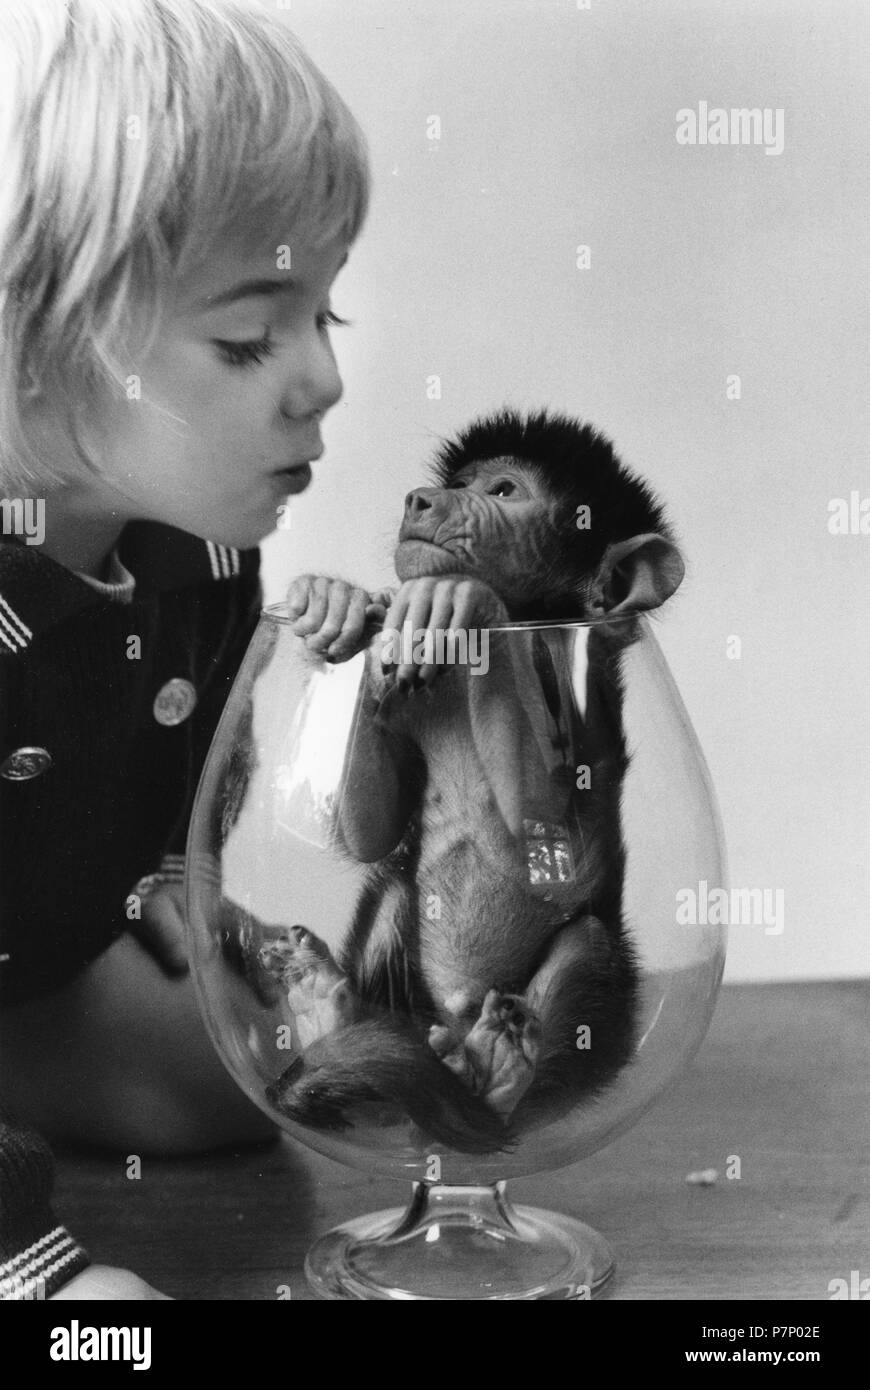 Girl watching a small monkey in a glass, England, Great Britain Stock Photo